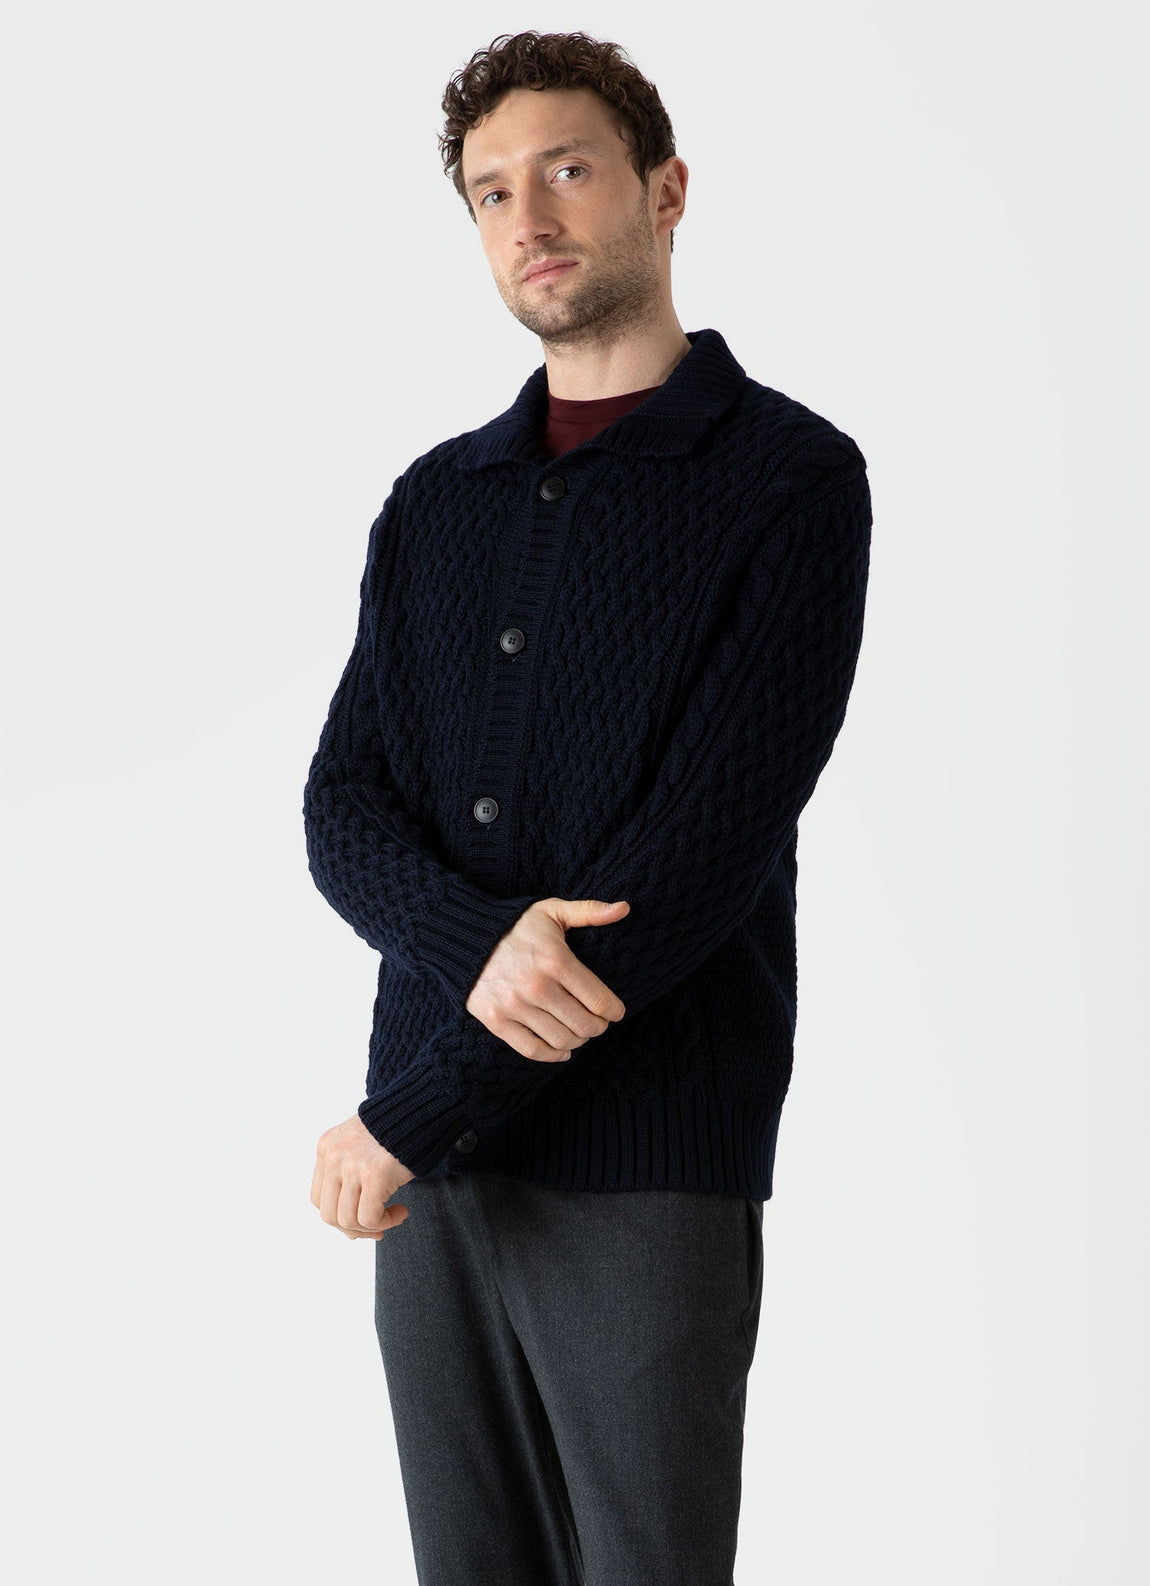 Men’s Vintage Sweaters, Retro Jumpers 1920s to 1980s